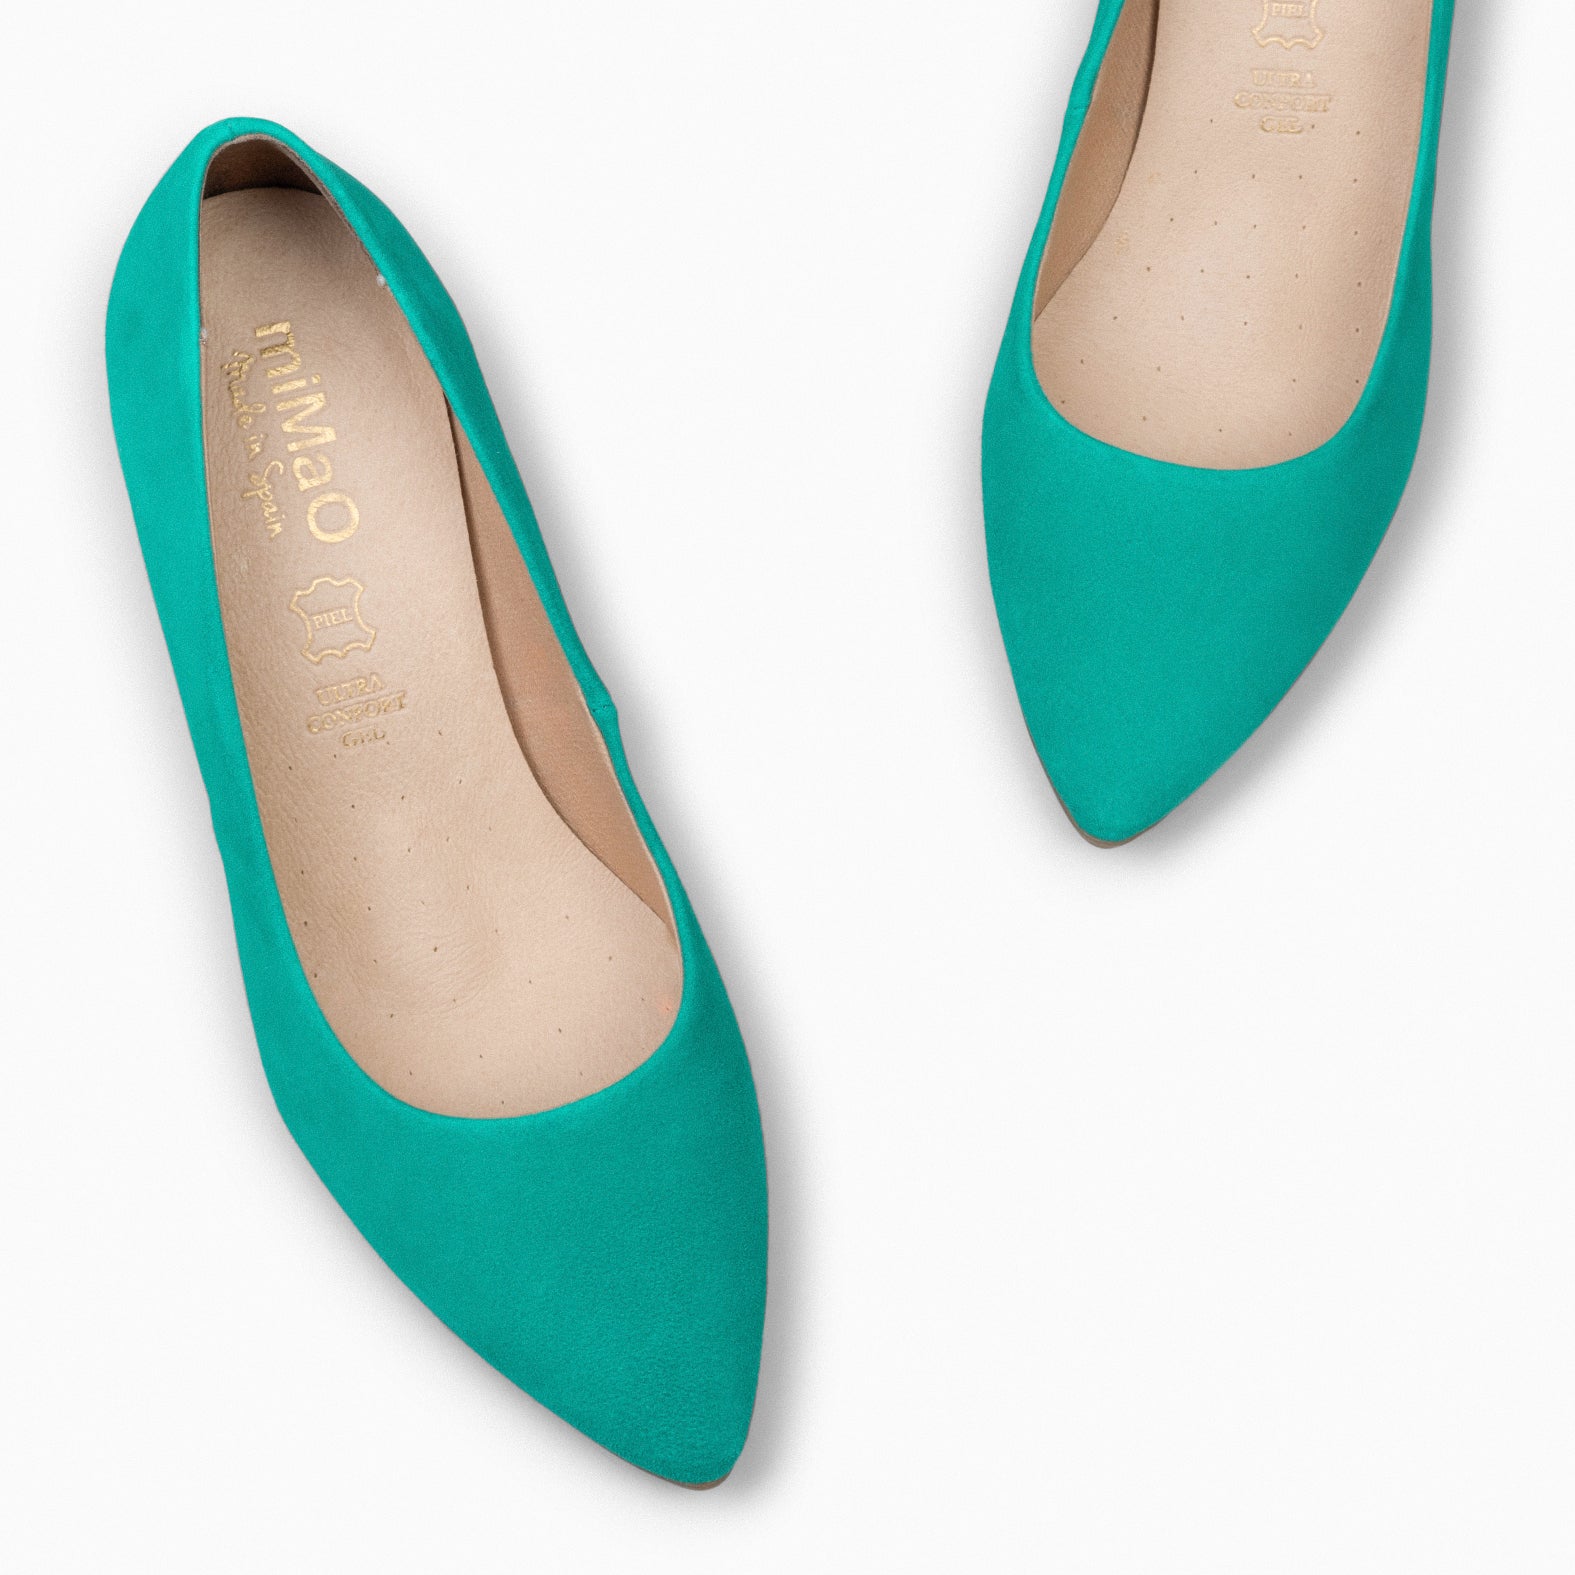 URBAN S – TURQUOISE Suede Mid-Heeled Shoes 